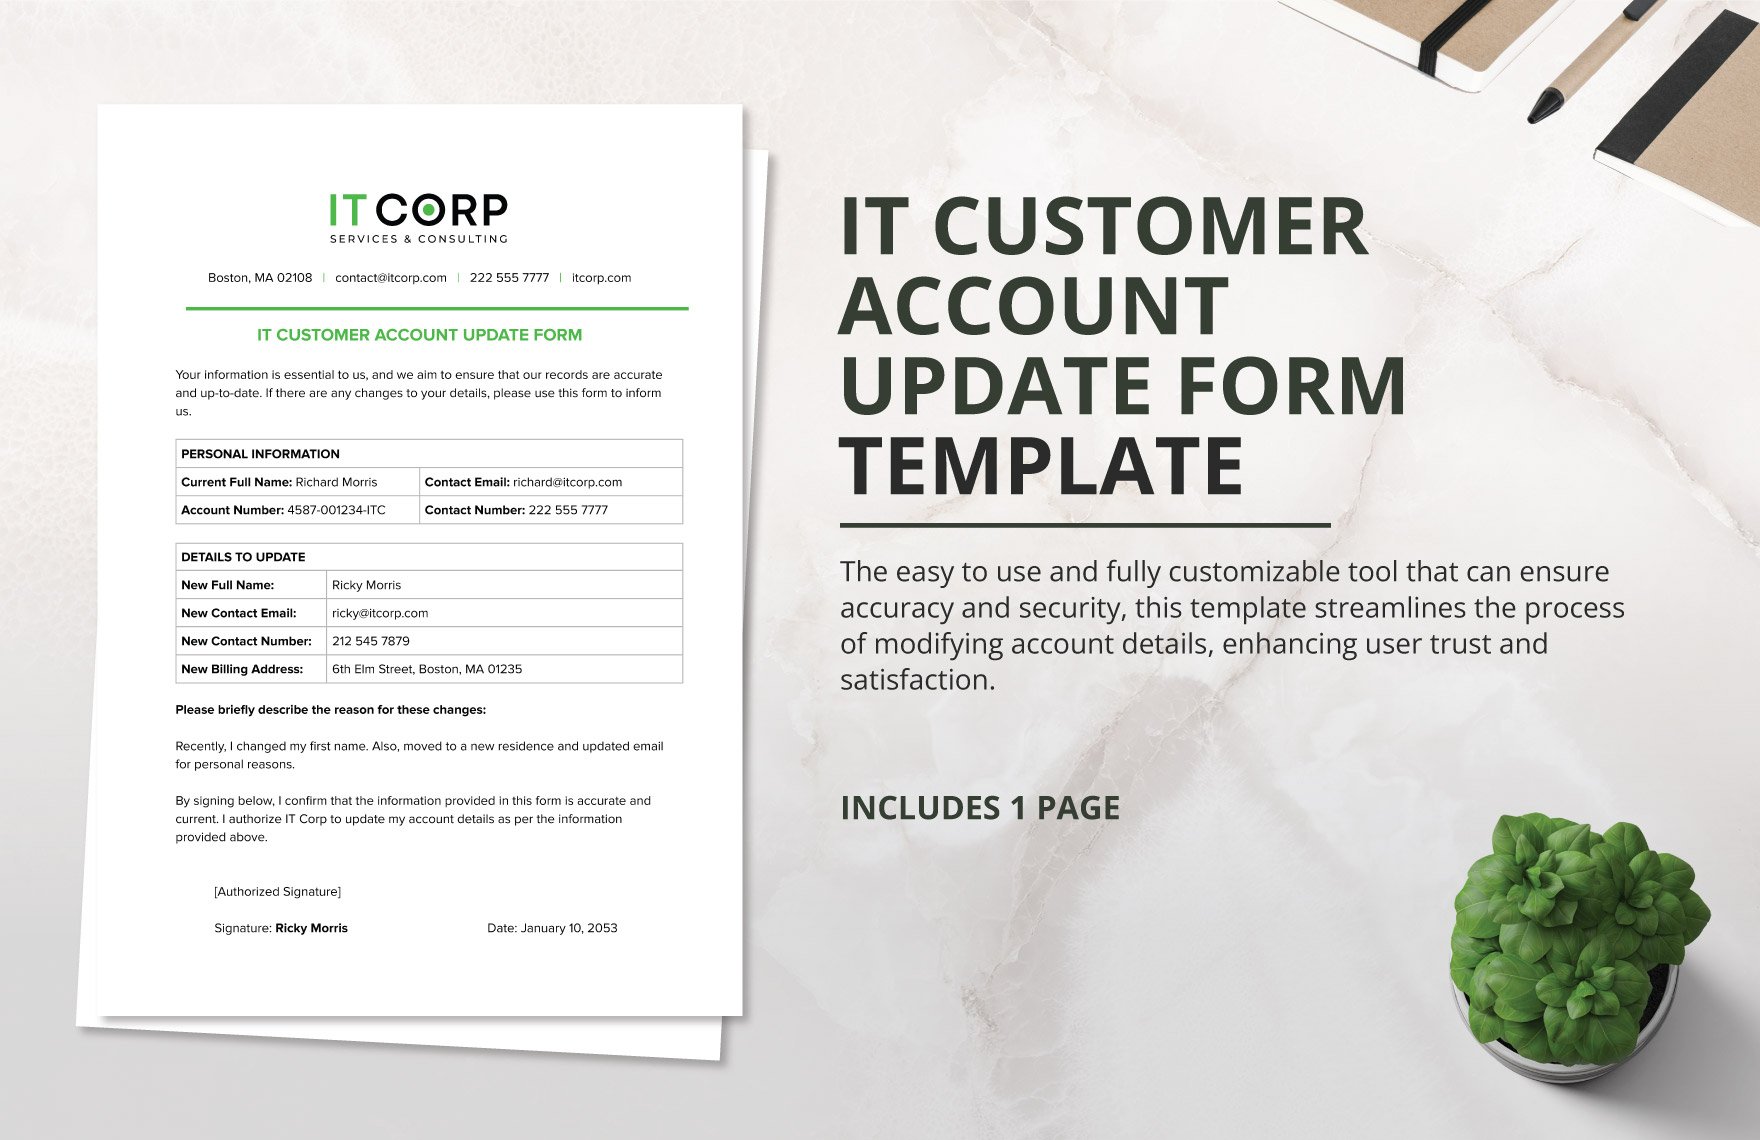 IT Customer Account Update Form Template